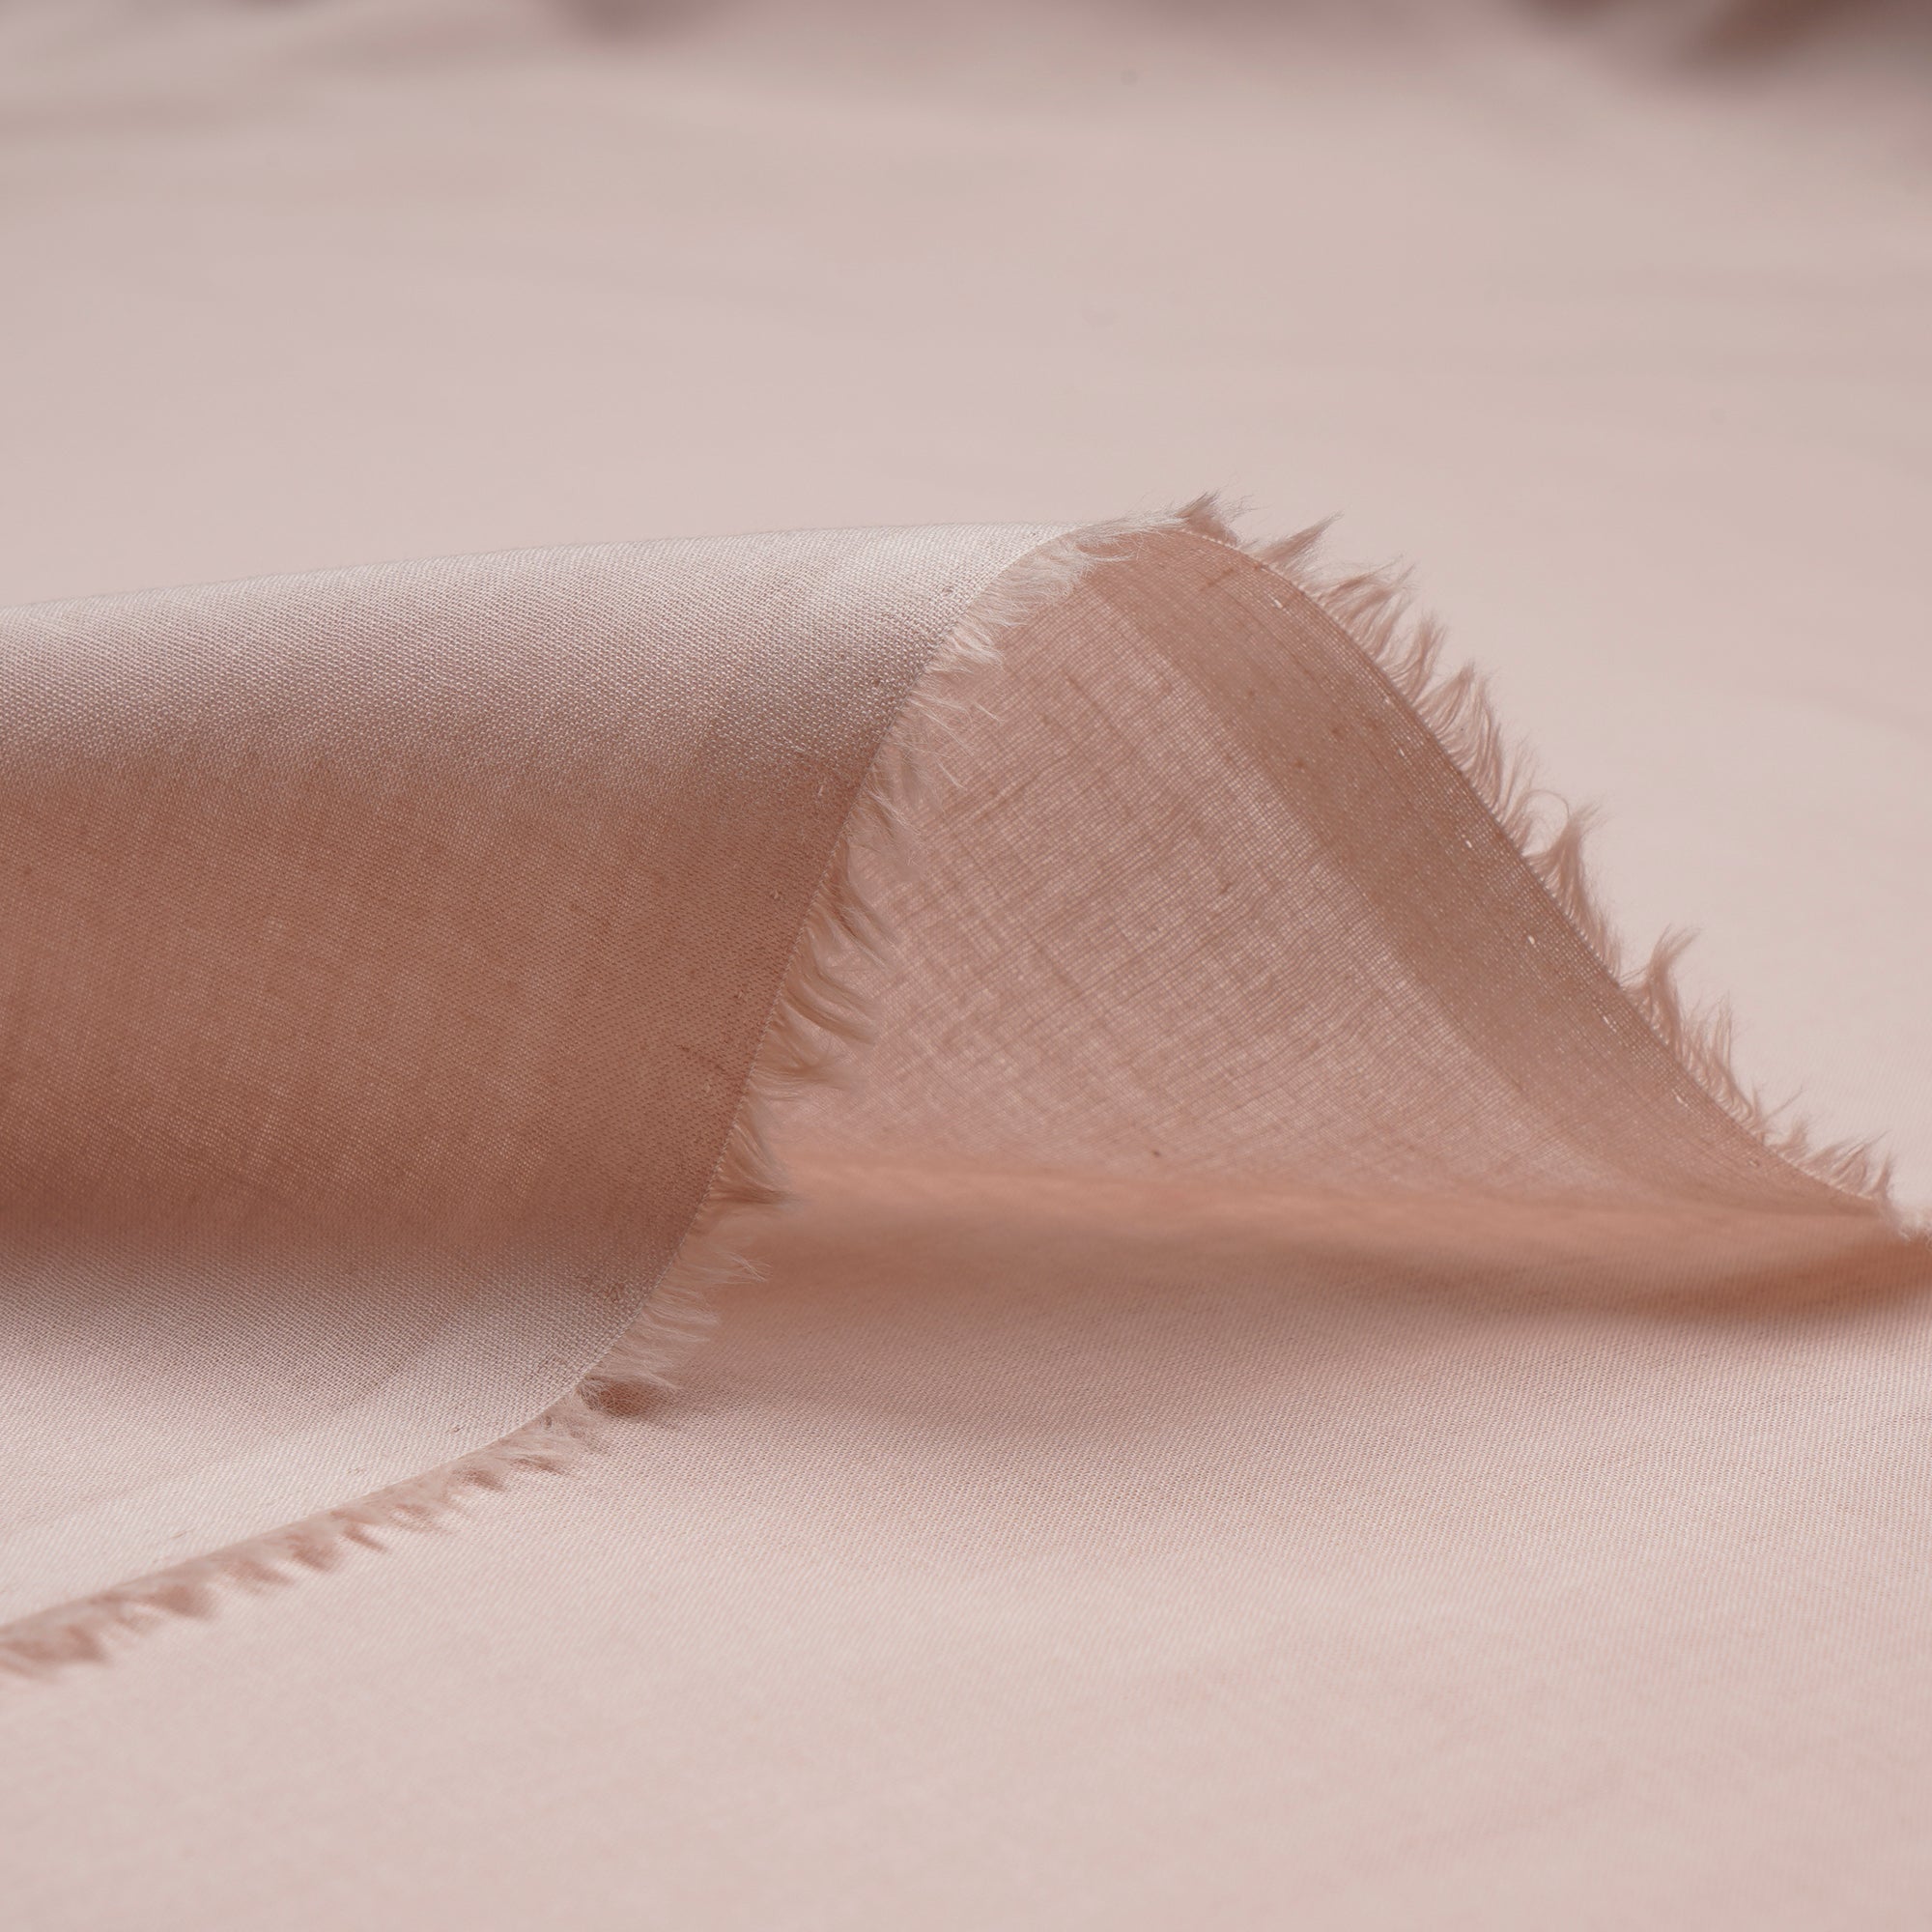 Pink Tint Color Cotton Voile Fabric